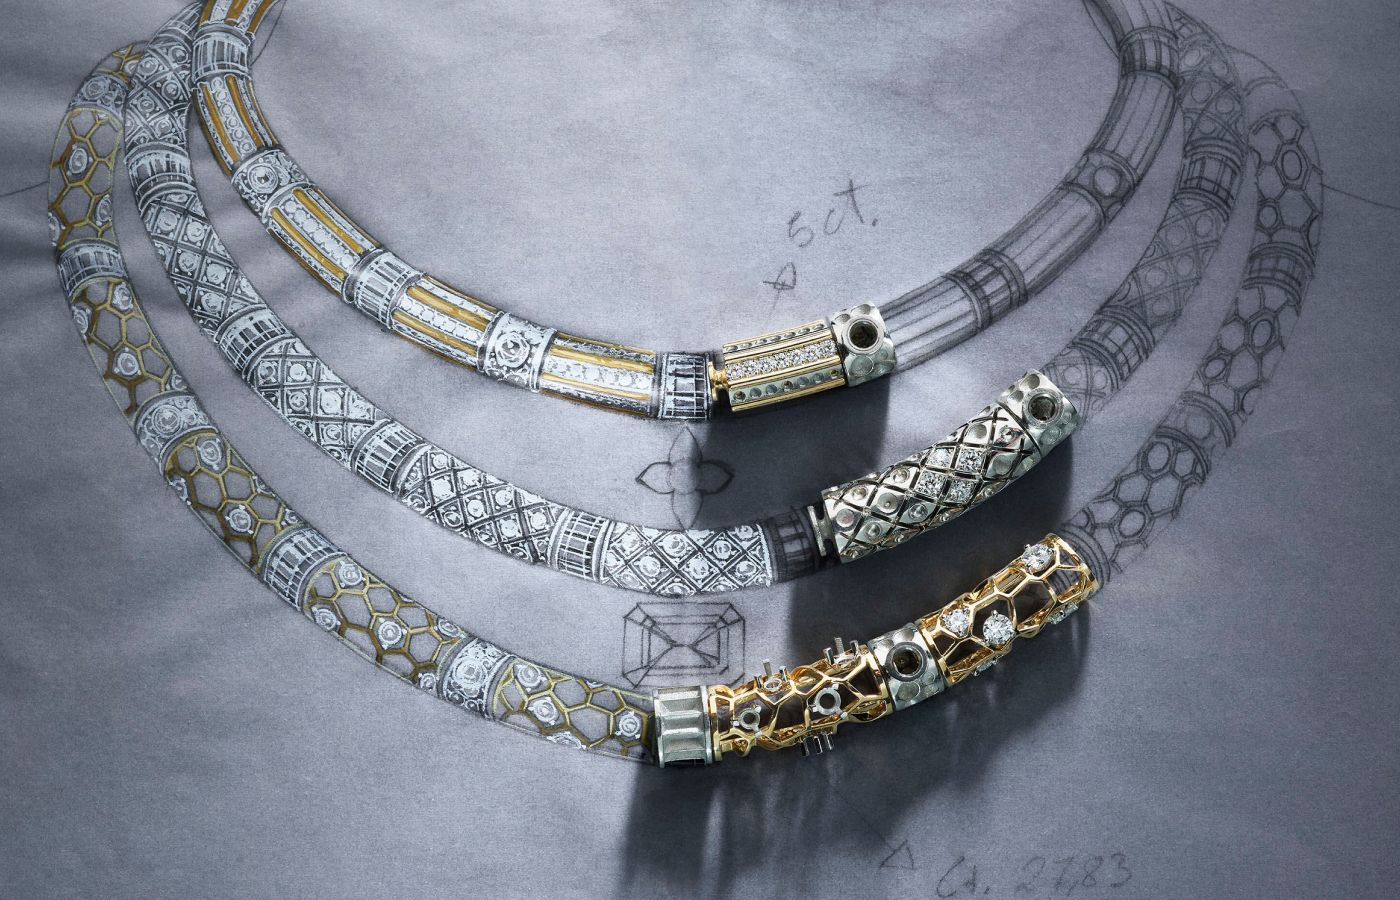 A Closer Look at Louis Vuitton's Largest High Jewelry Collection, Deep Time